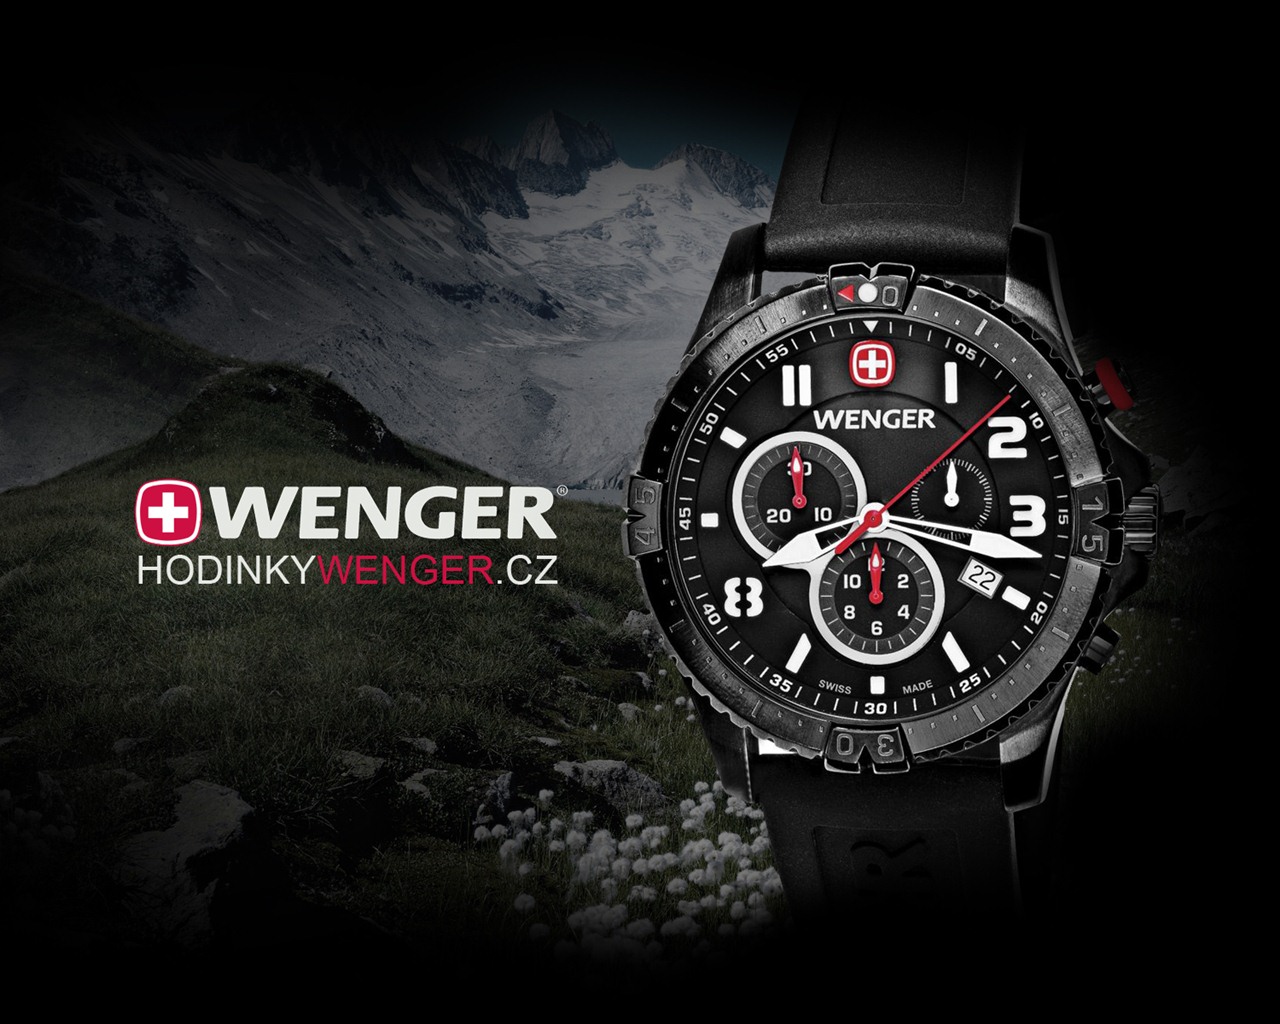 World famous watches wallpapers (1) #1 - 1280x1024